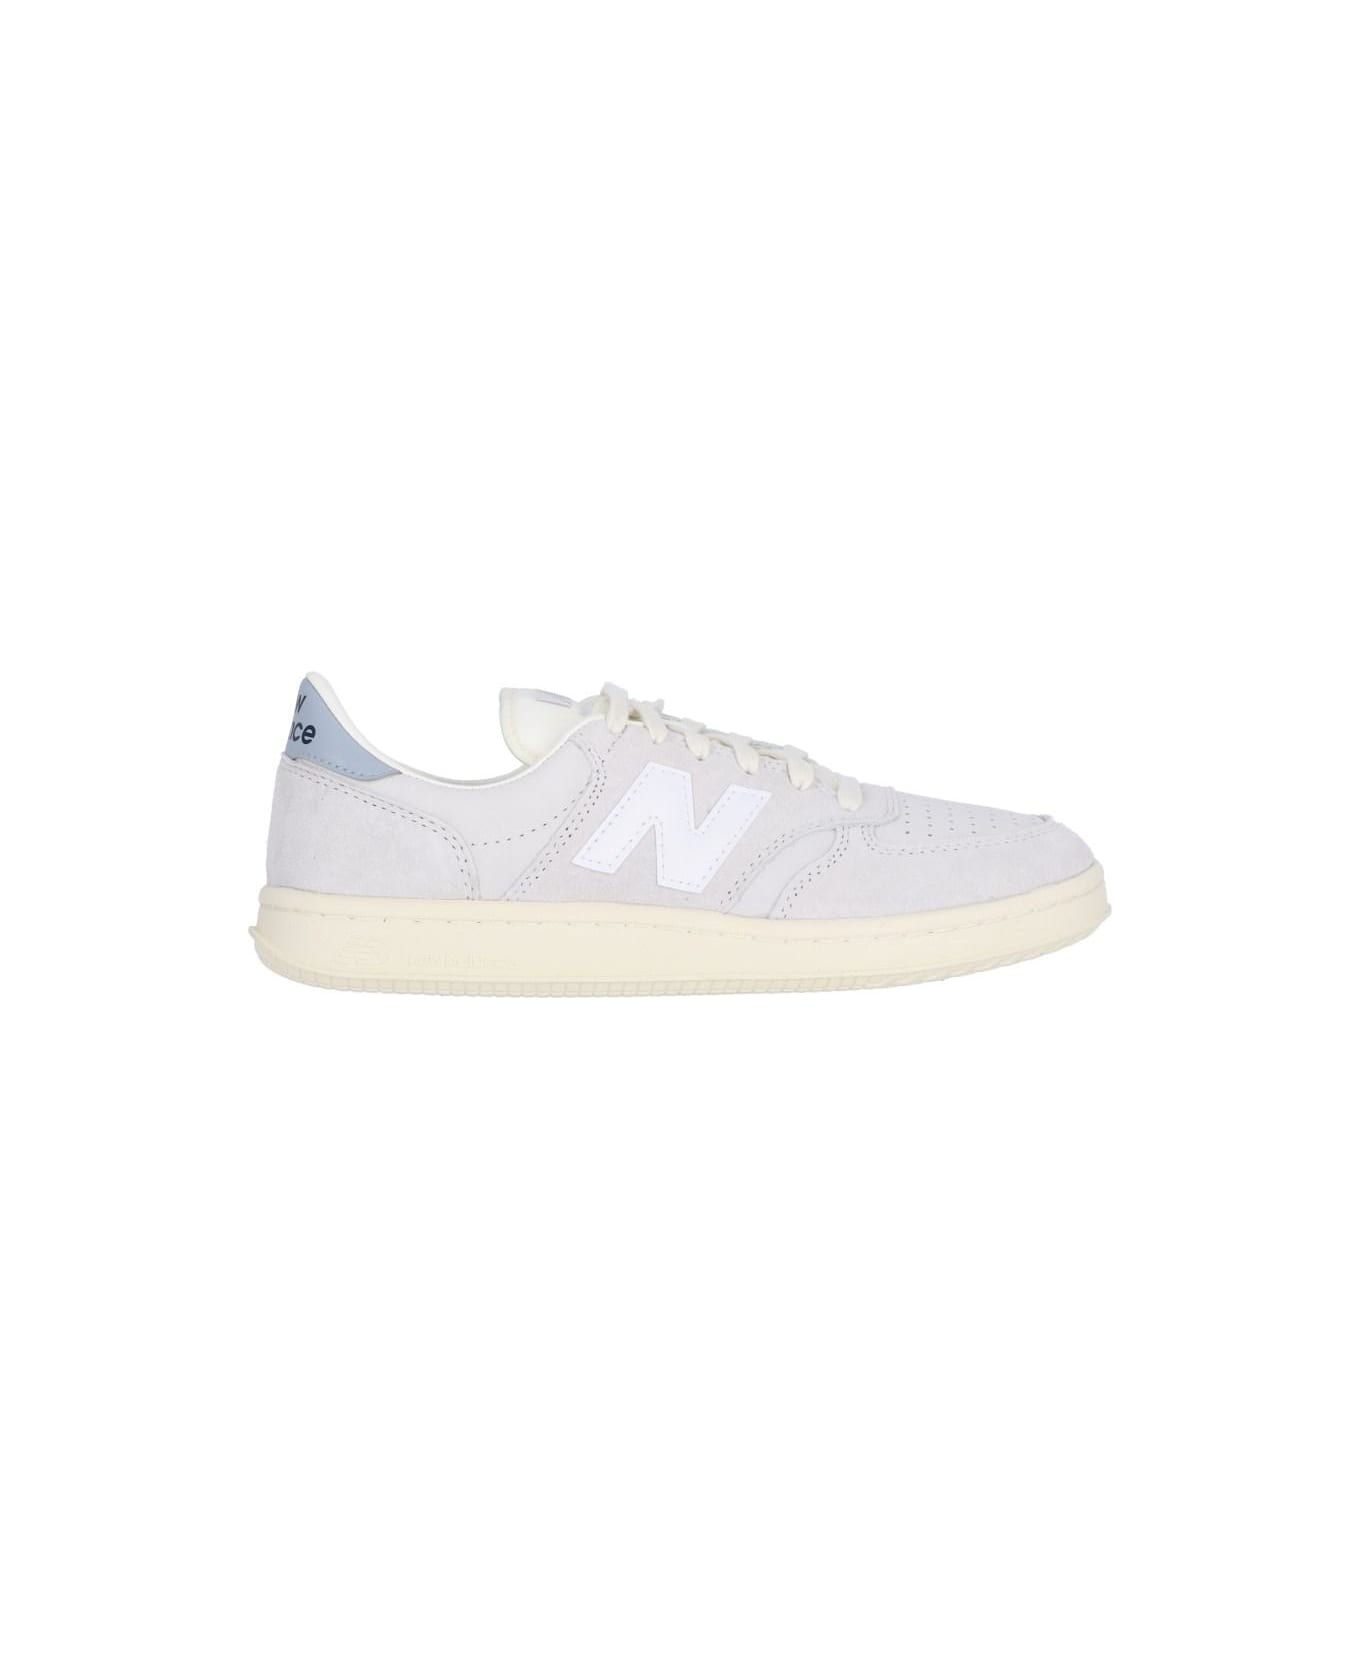 New Balance 't500' Sneakers - White